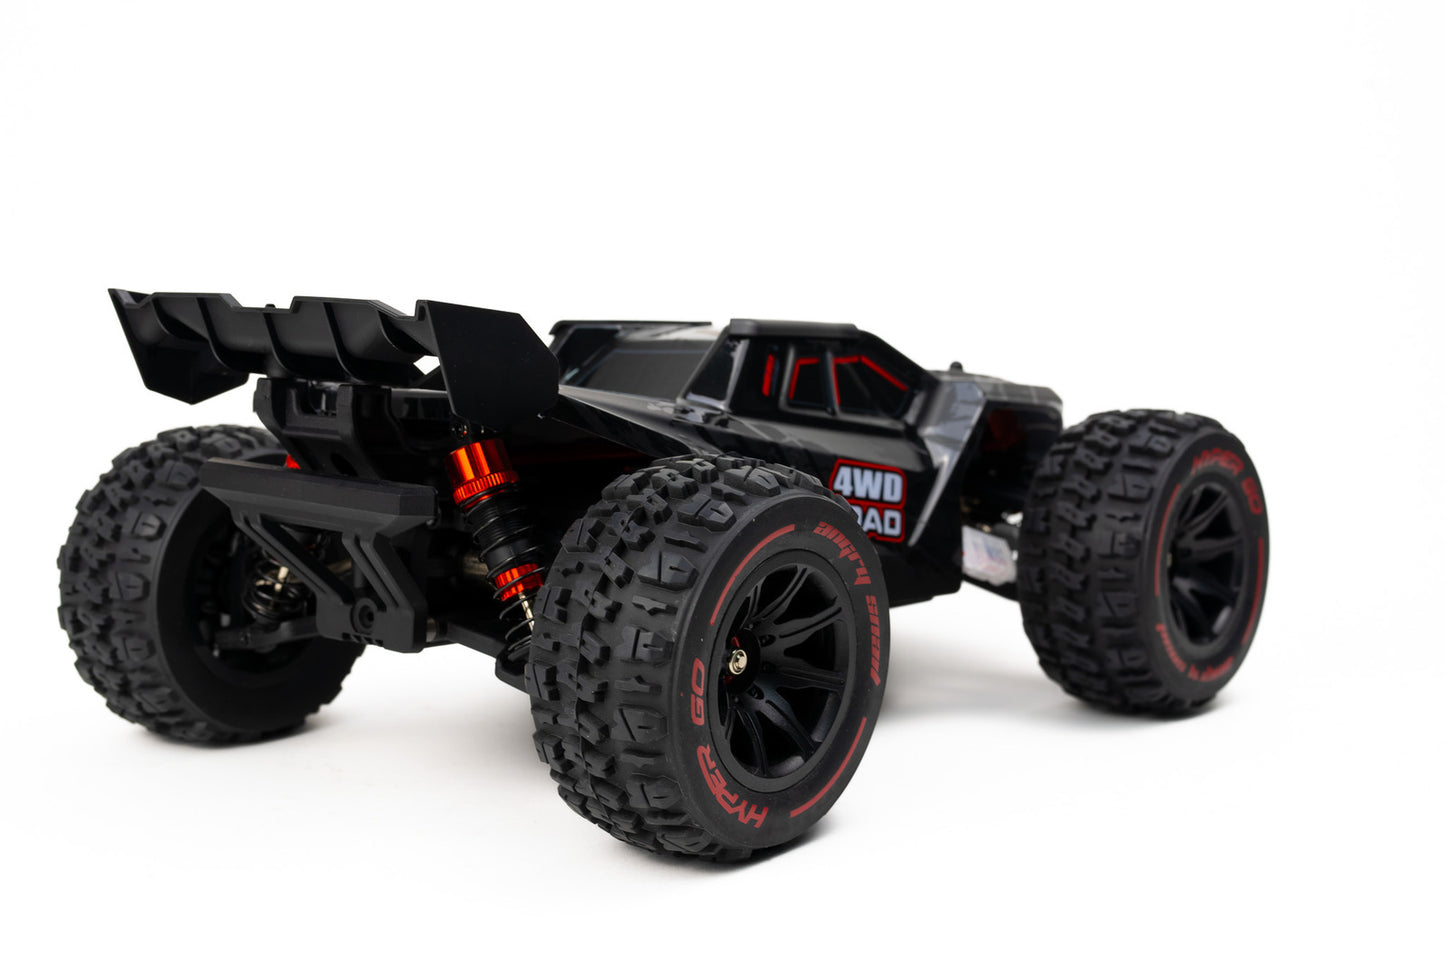 MJX 1/14 Hyper Go 4WD High-speed Off-road Brushless RC Truggy  MJX-14210